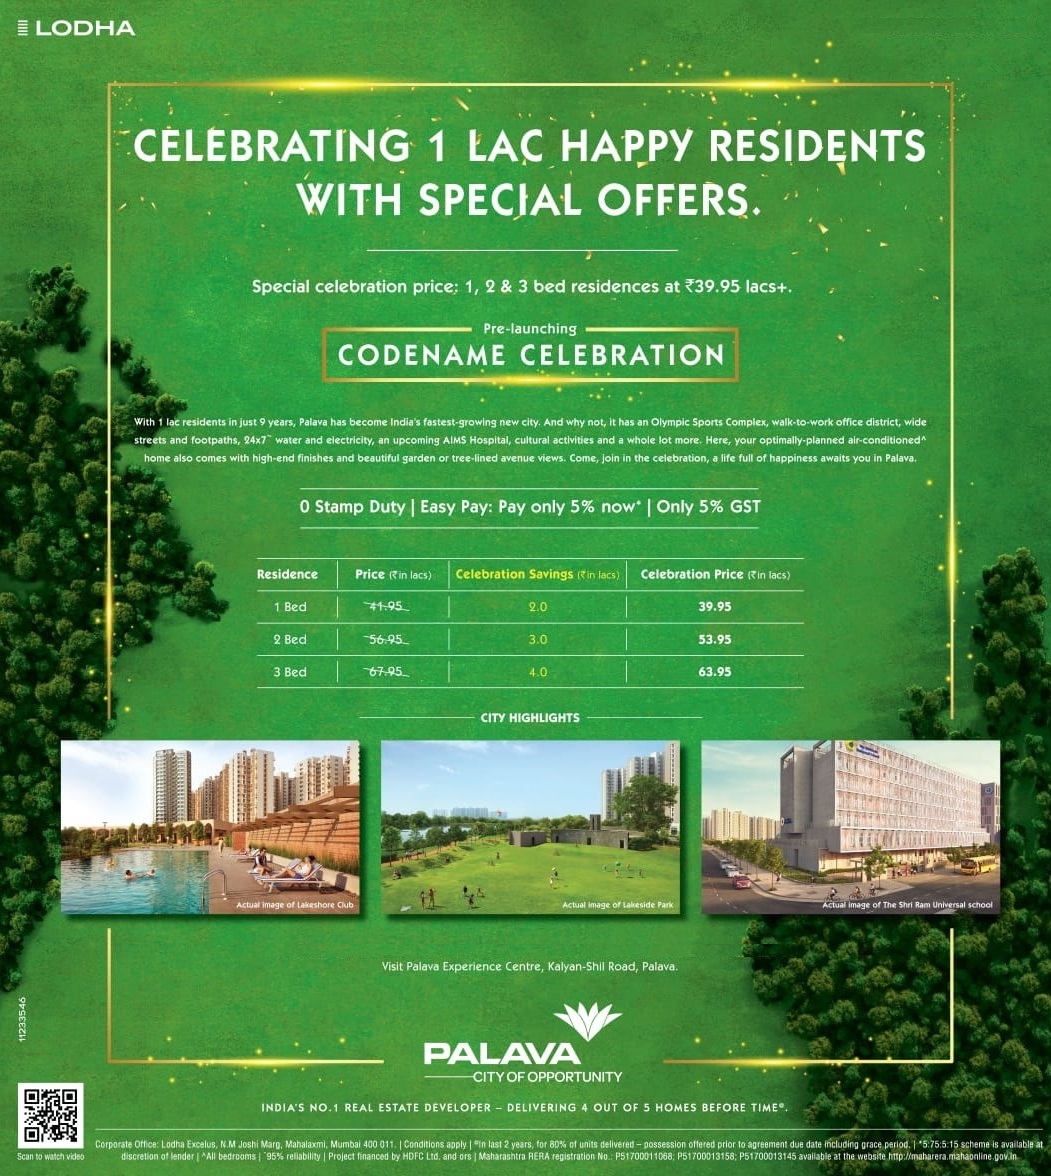 Special celebration price: 1, 2 & 3 bed residences Rs 39.95 lacs at Lodha Codename Celebration in Mumbai